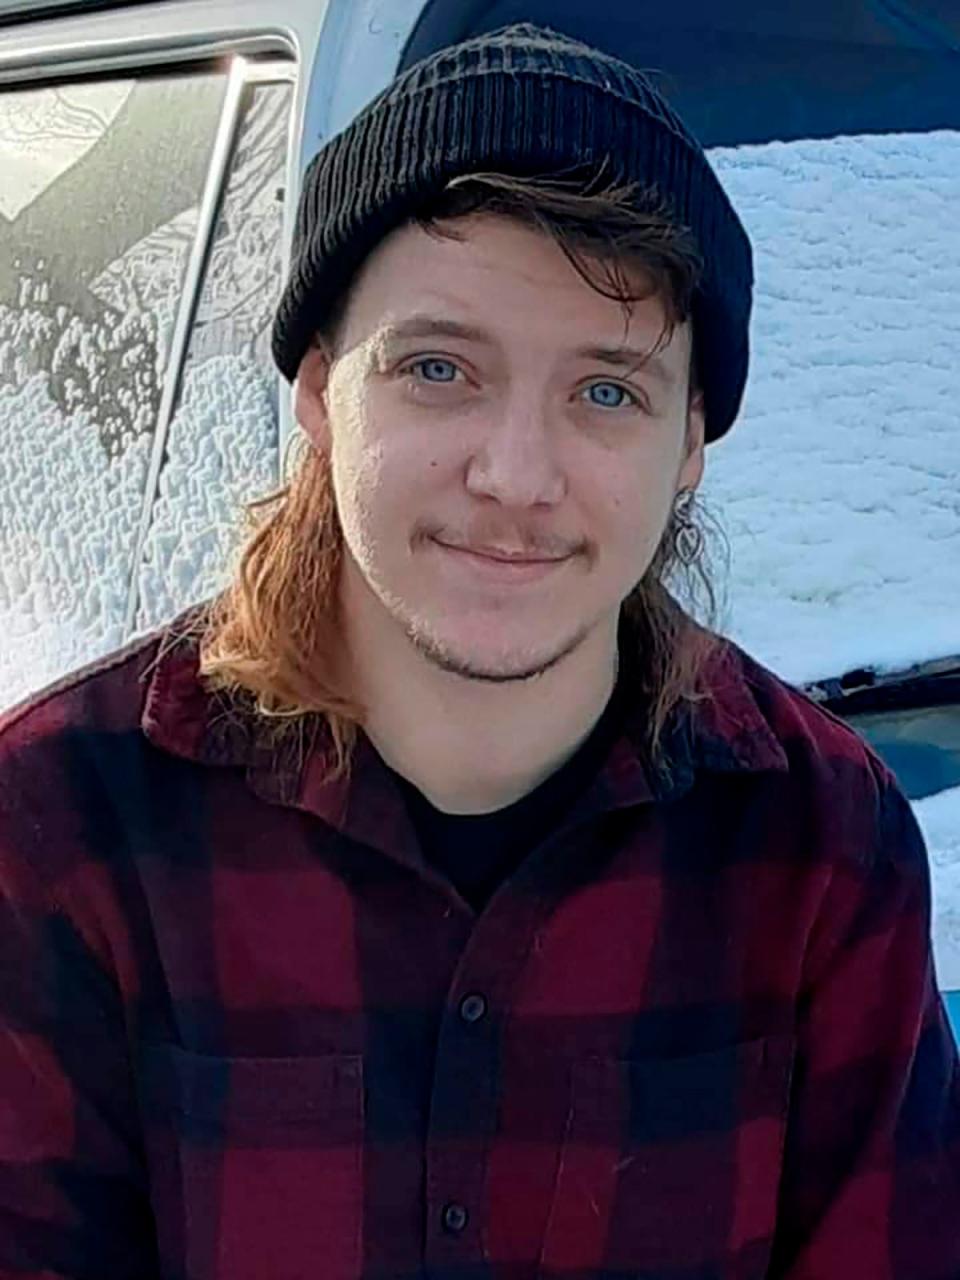 Daniel Aston, a 28-year-old beloved bartender at Club Q in Colorado Springs, died while trying to protect his friend and coworker when a shooter attacked the LGBTQ hotspot in November 2022 (Courtesy of Jeff Aston)